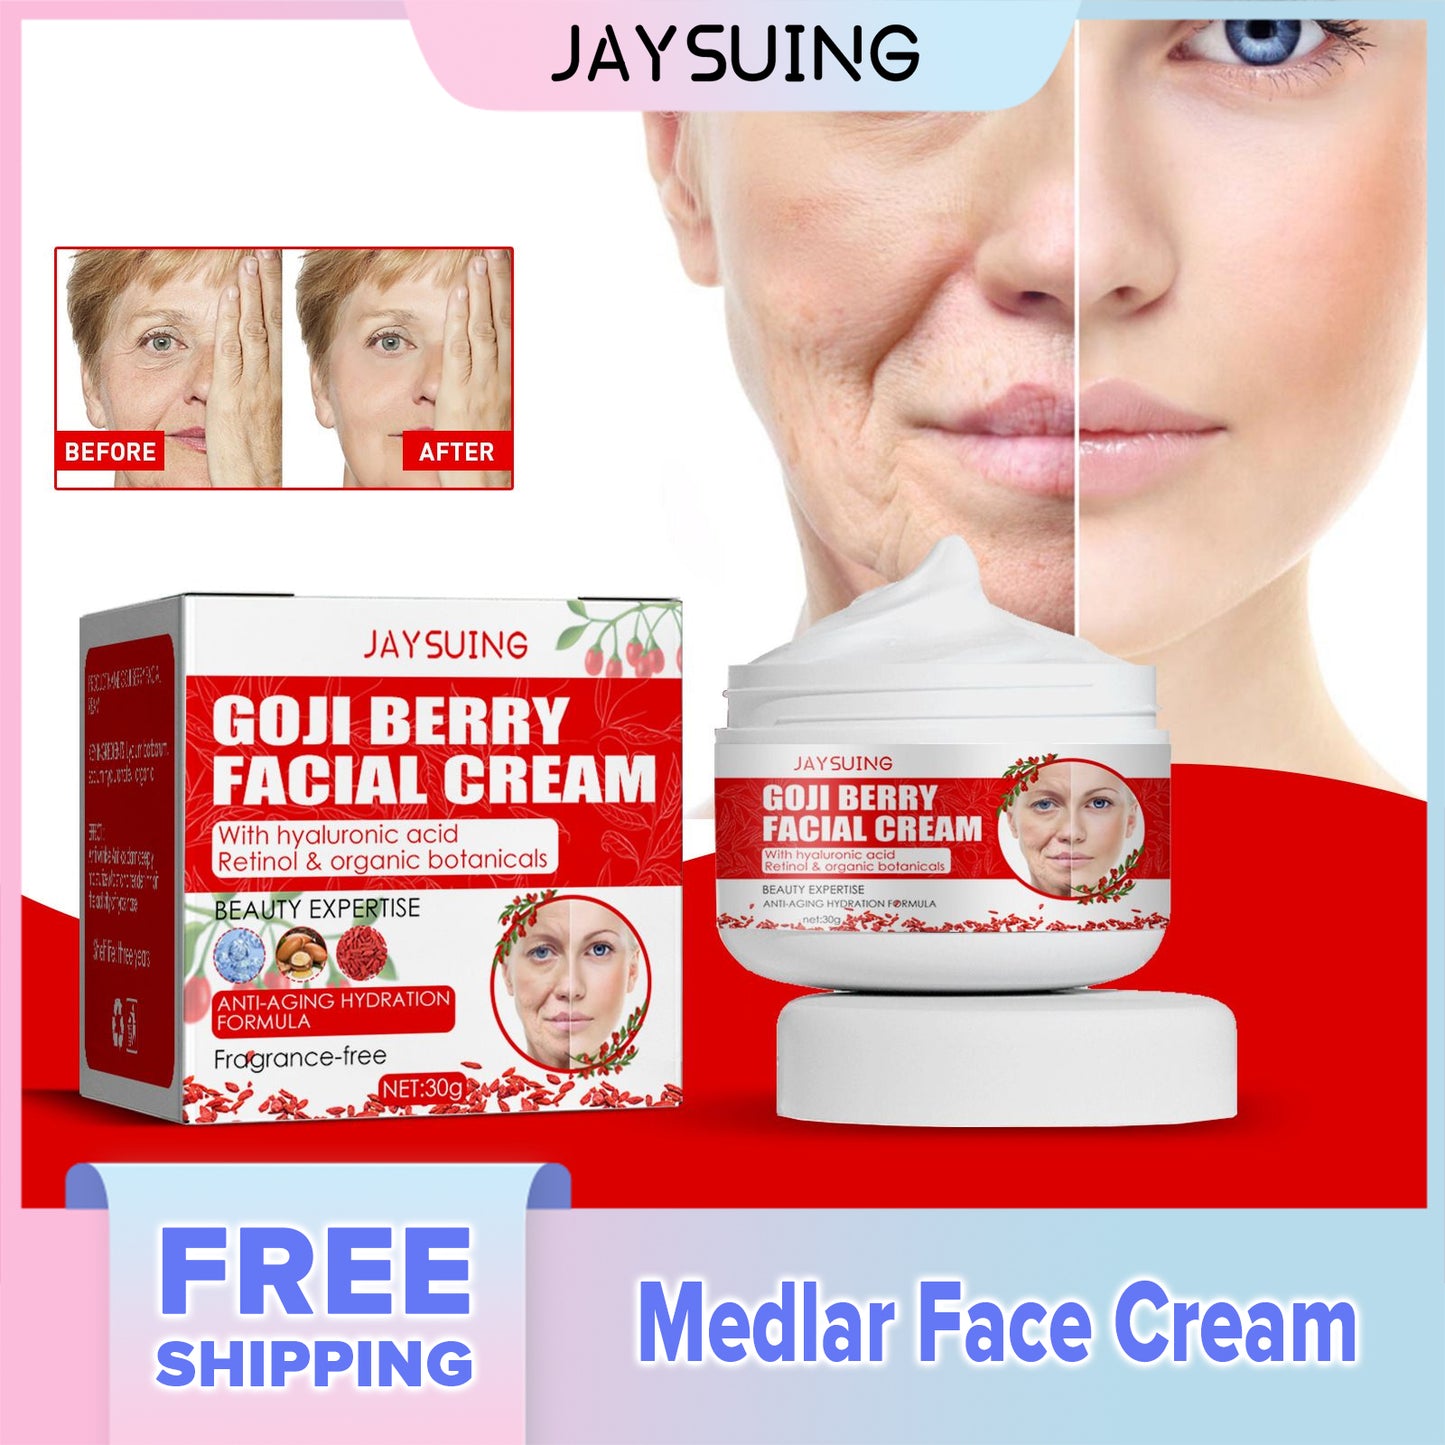 Jaysuing Medlar Face Cream Anti Wrinkle, Moisturizing, Tightening, Contour Thinning, Decree Wrinkles, Lifting And Firming The Face (30g)